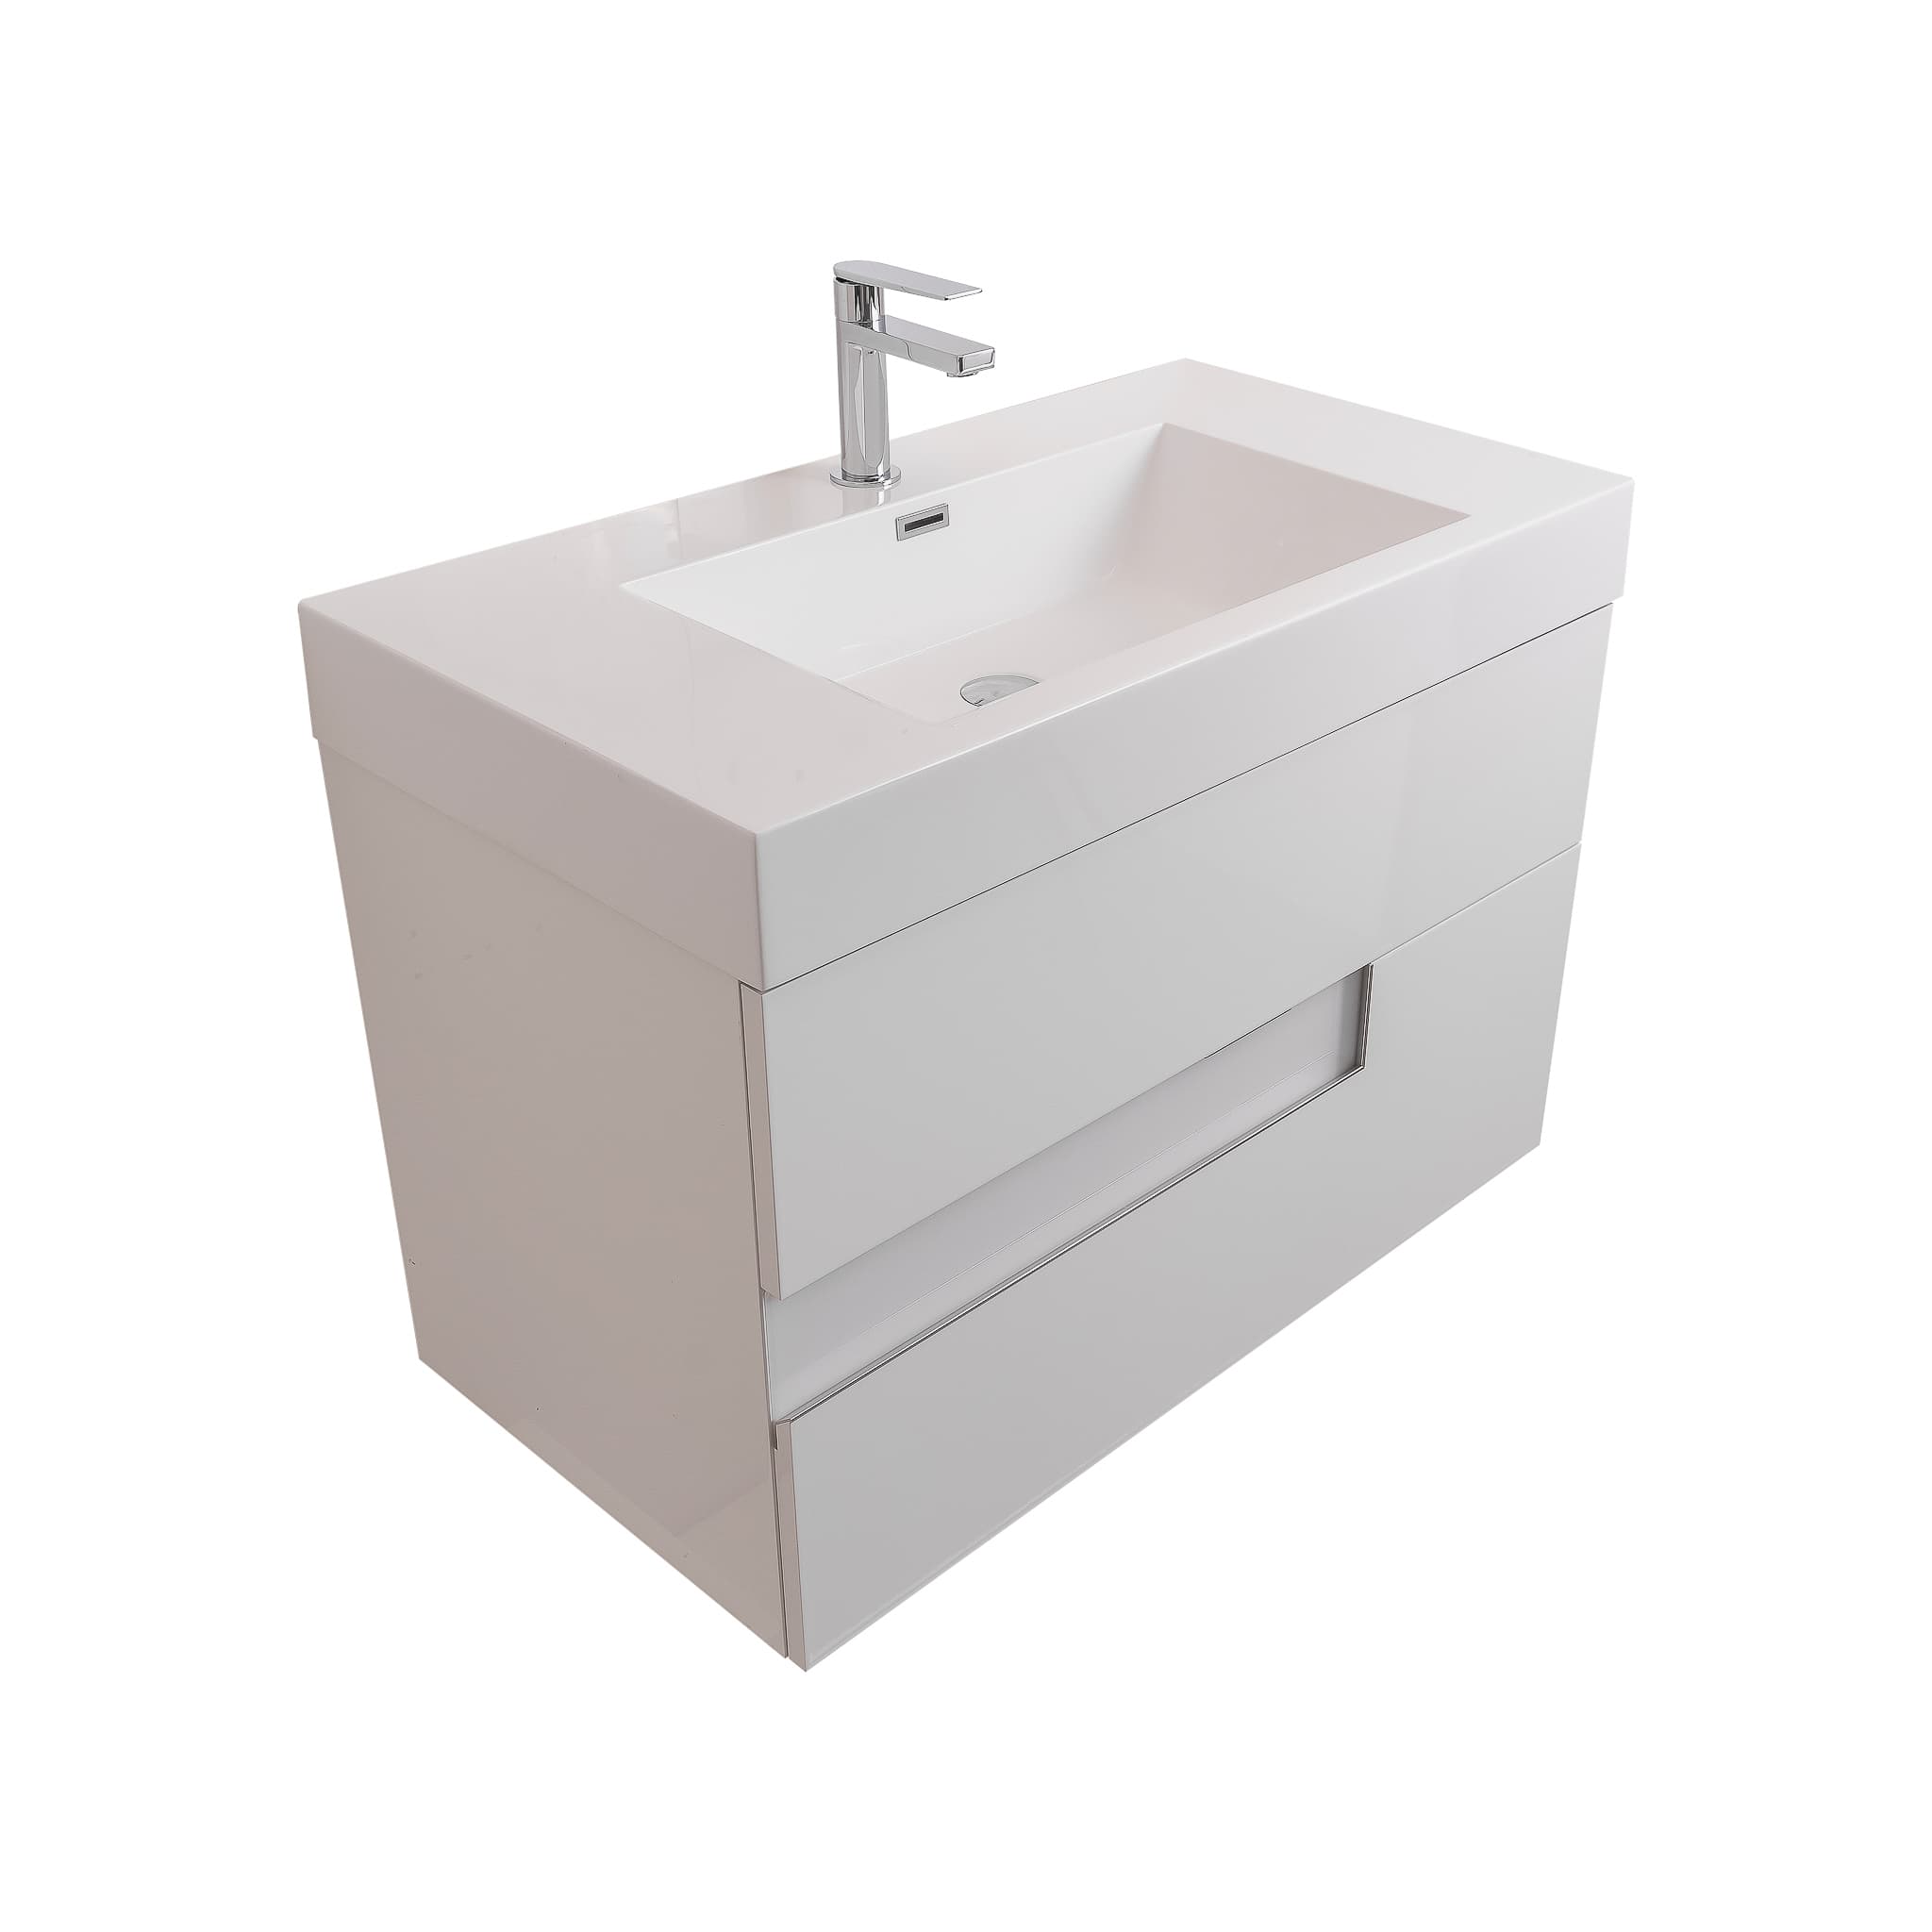 Vision 35.5 White High Gloss Cabinet, Square Cultured Marble Sink, Wall Mounted Modern Vanity Set